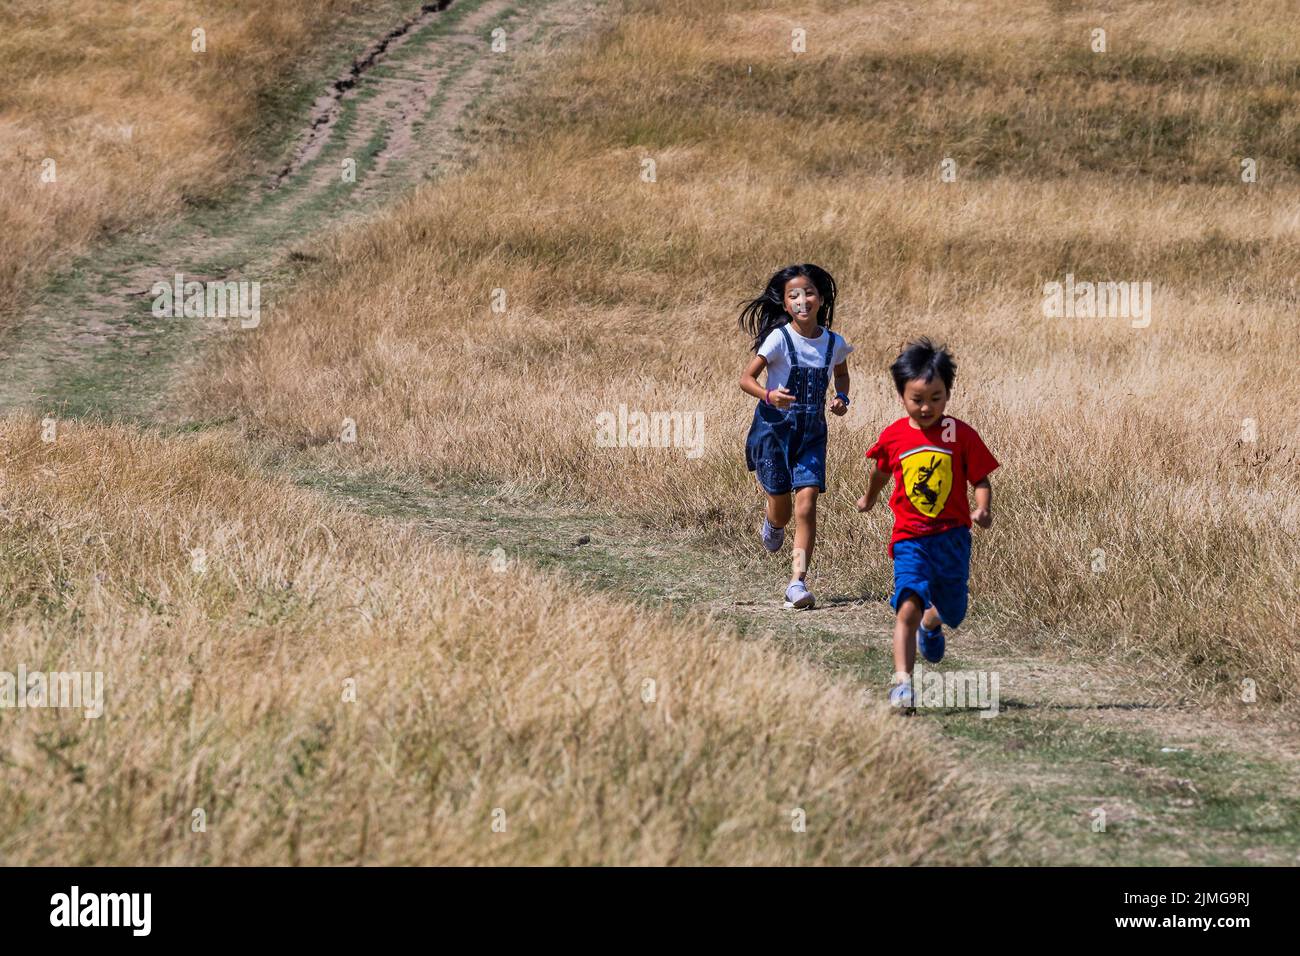 London, UK. 6th Aug, 2022. Children enjoy running down the dry path, which has a huge crack in it, amongst the yellow scorched grass of Parliament Hill - Hot weather continues the drought conditions on Hampstead Heath. Credit: Guy Bell/Alamy Live News Stock Photo